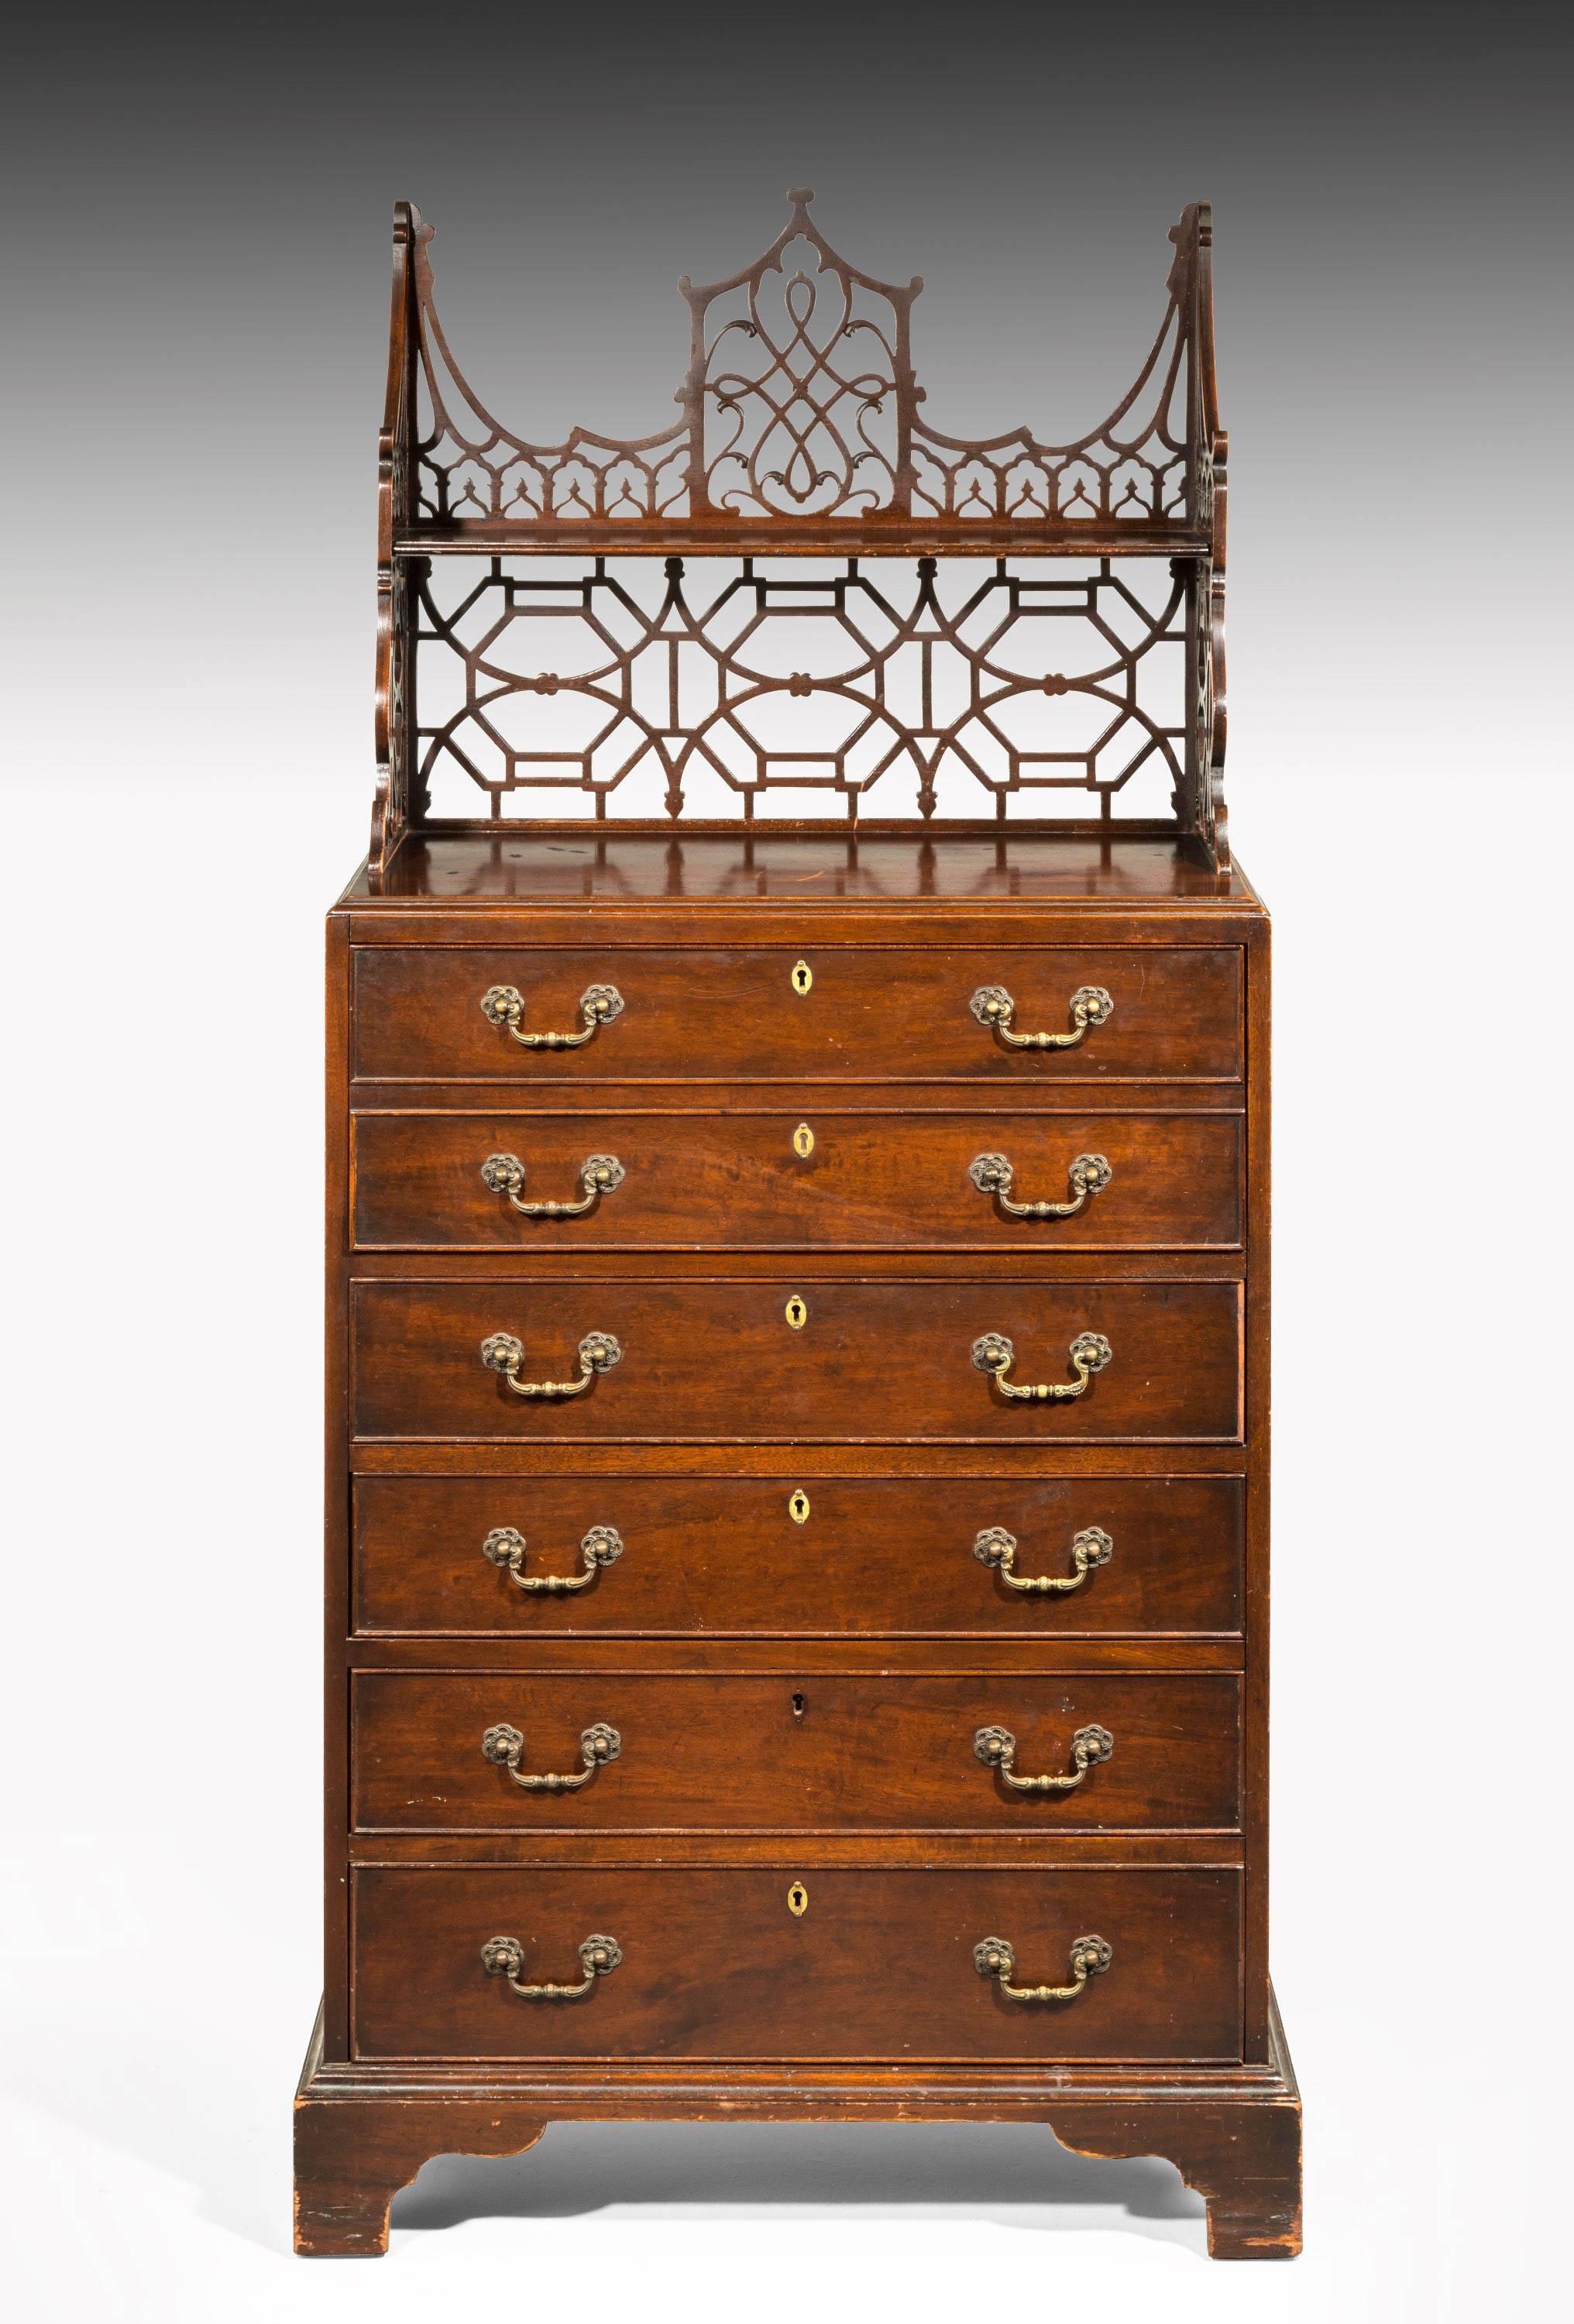 A most attractive Chippendale design mahogany chest of drawers with the original upper fretwork bookshelves. Shaped bracket feet. Good original brass handles. The design circa 1765-1770 but the actual piece, circa 1910.